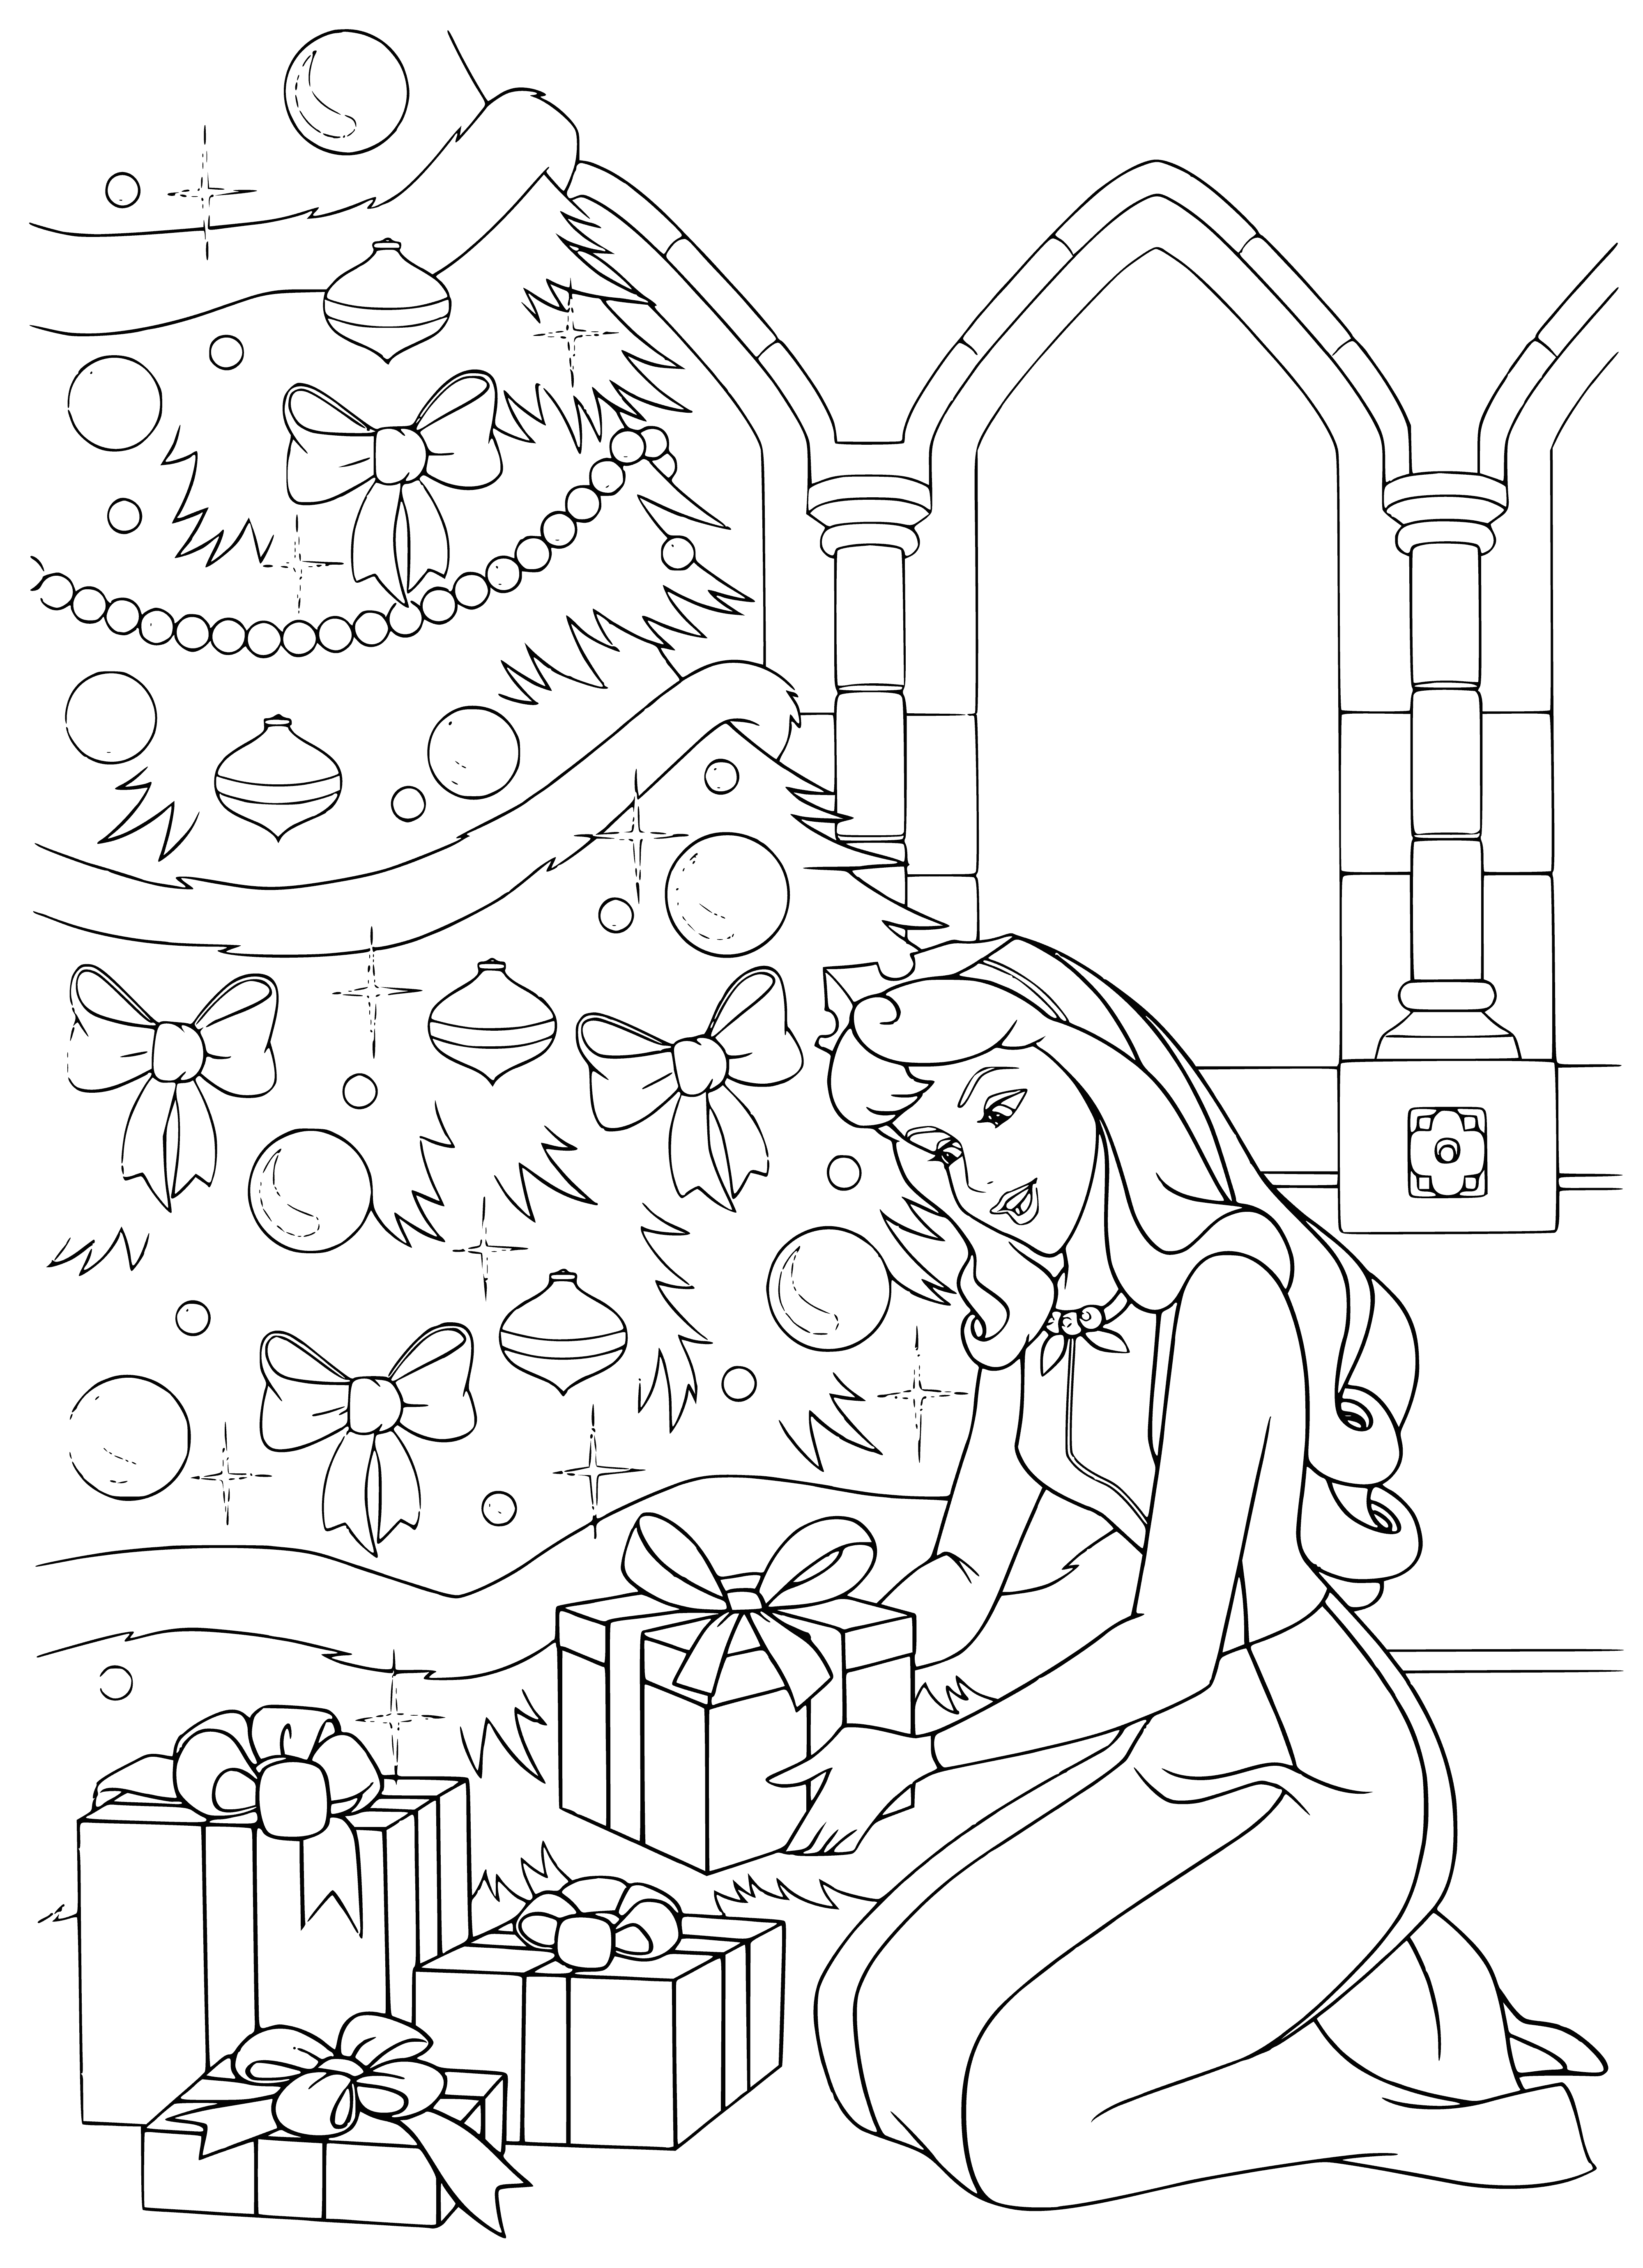 Gifts under the tree coloring page